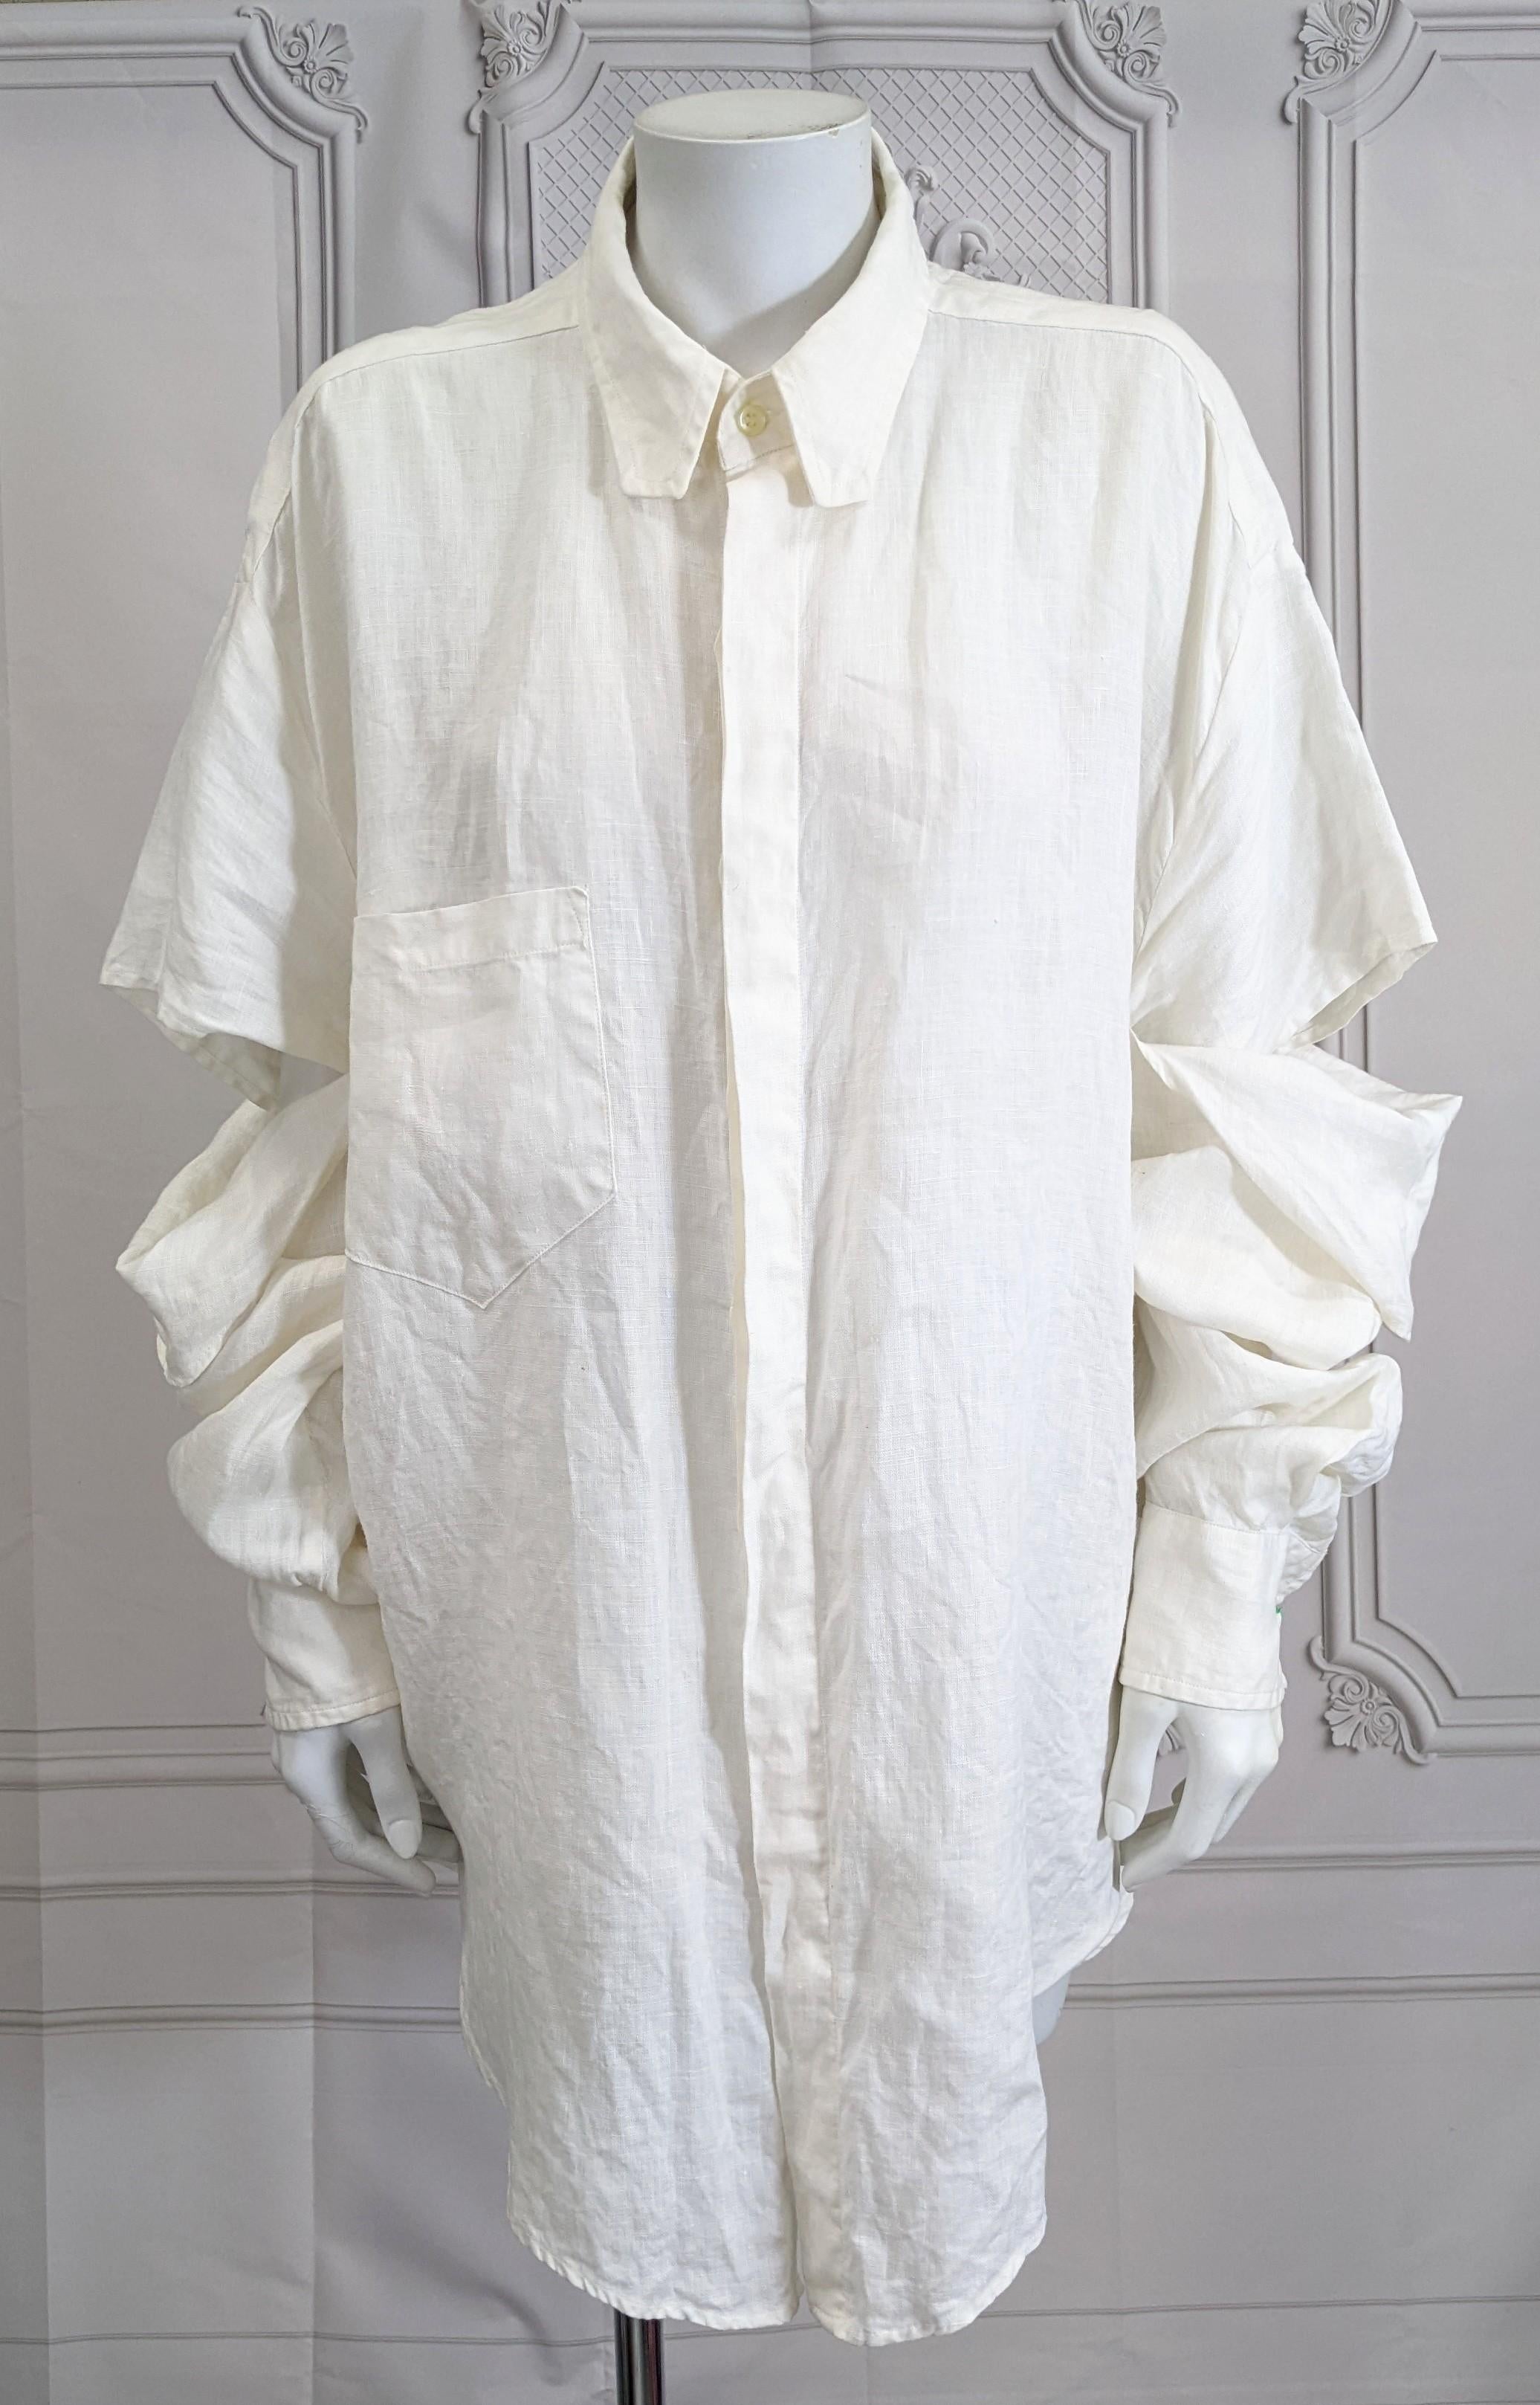 Men's Linen Club Shirt by Susanne Bartsch from the 1980's. Exaggerated New Romantic style proportions with double fall away sleeves and cut point collar. Oversized in ivory linen designed to wrinkle and stain after sustaining a night of frenzied